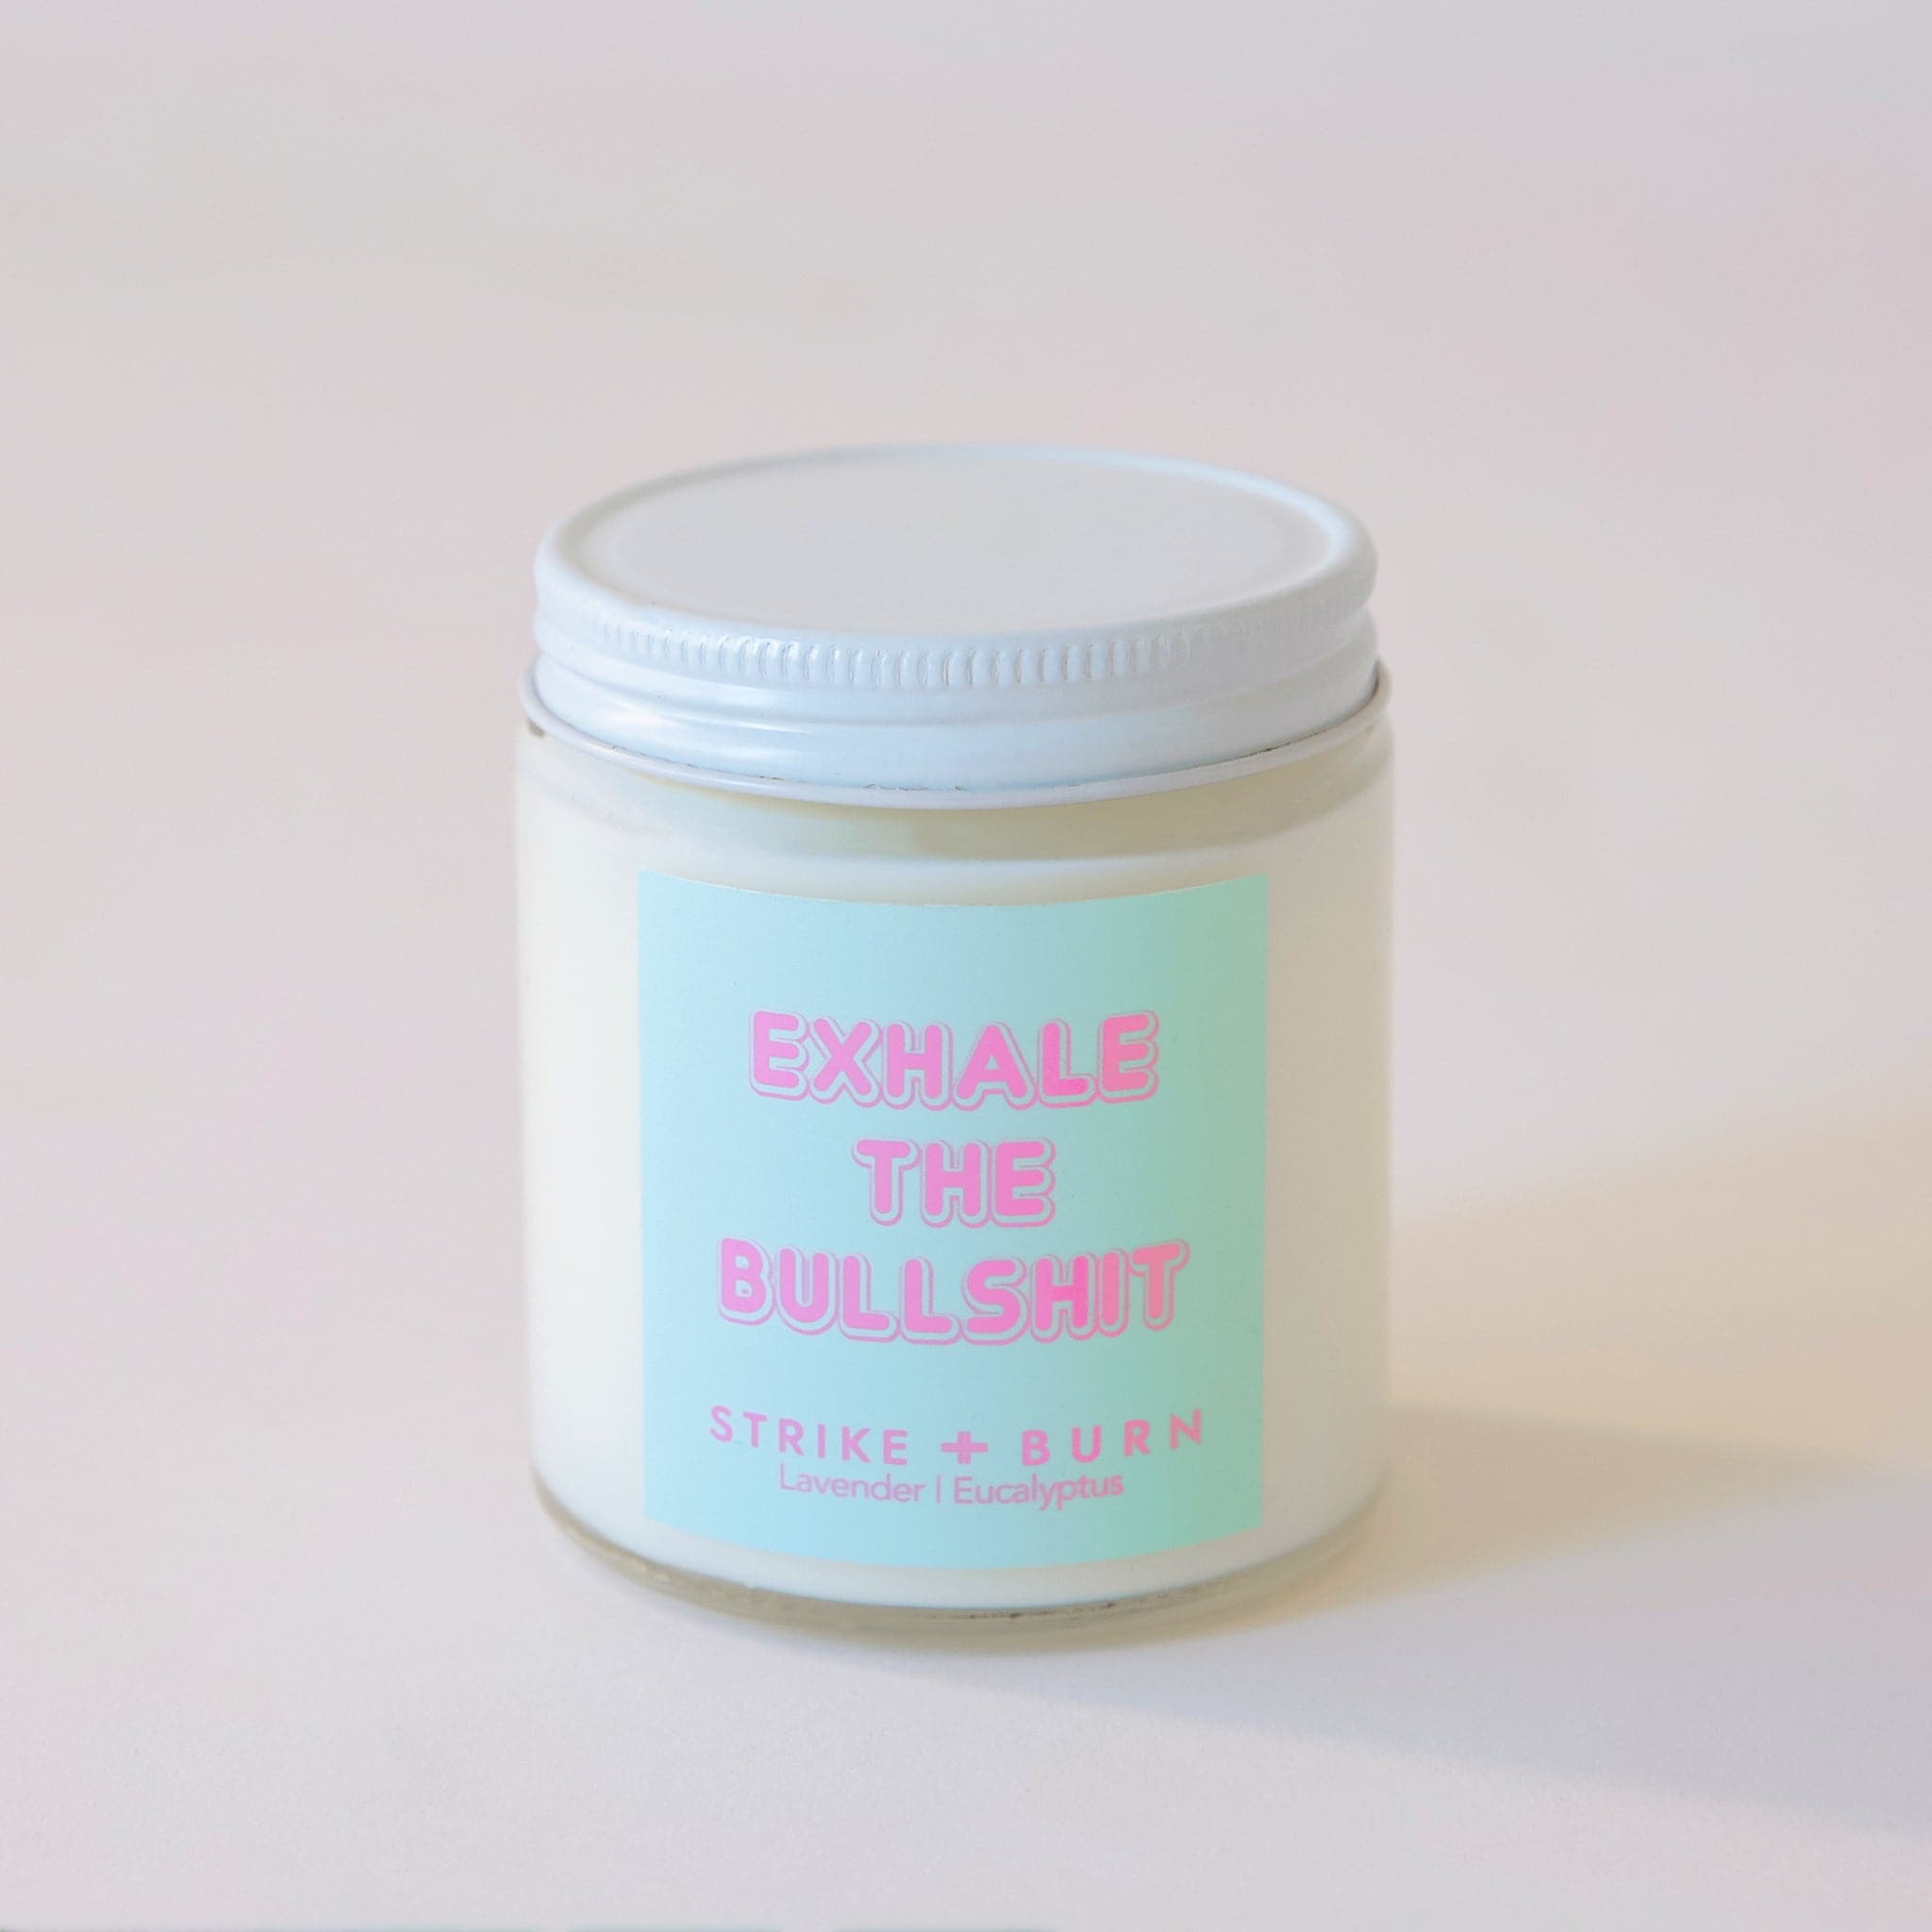 Clear, glass jar candle with white metal lid. Label says &quot;Exhale the bullshit&quot; in pink with a aqua colored background.